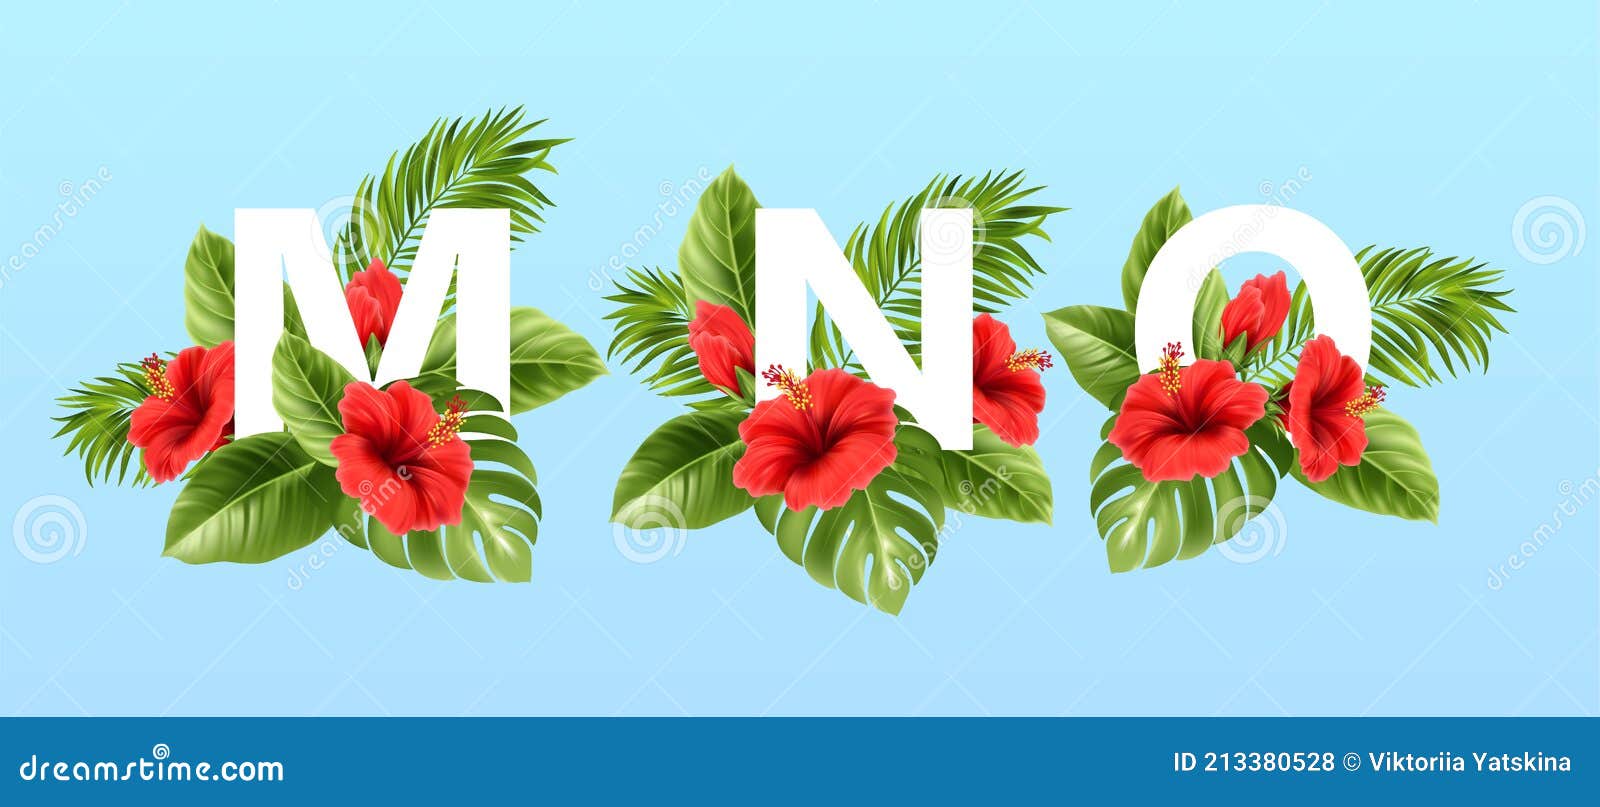 m n o letters surrounded by summer tropical leaves and red hibiscus flowers. tropical font for summer decoration. 